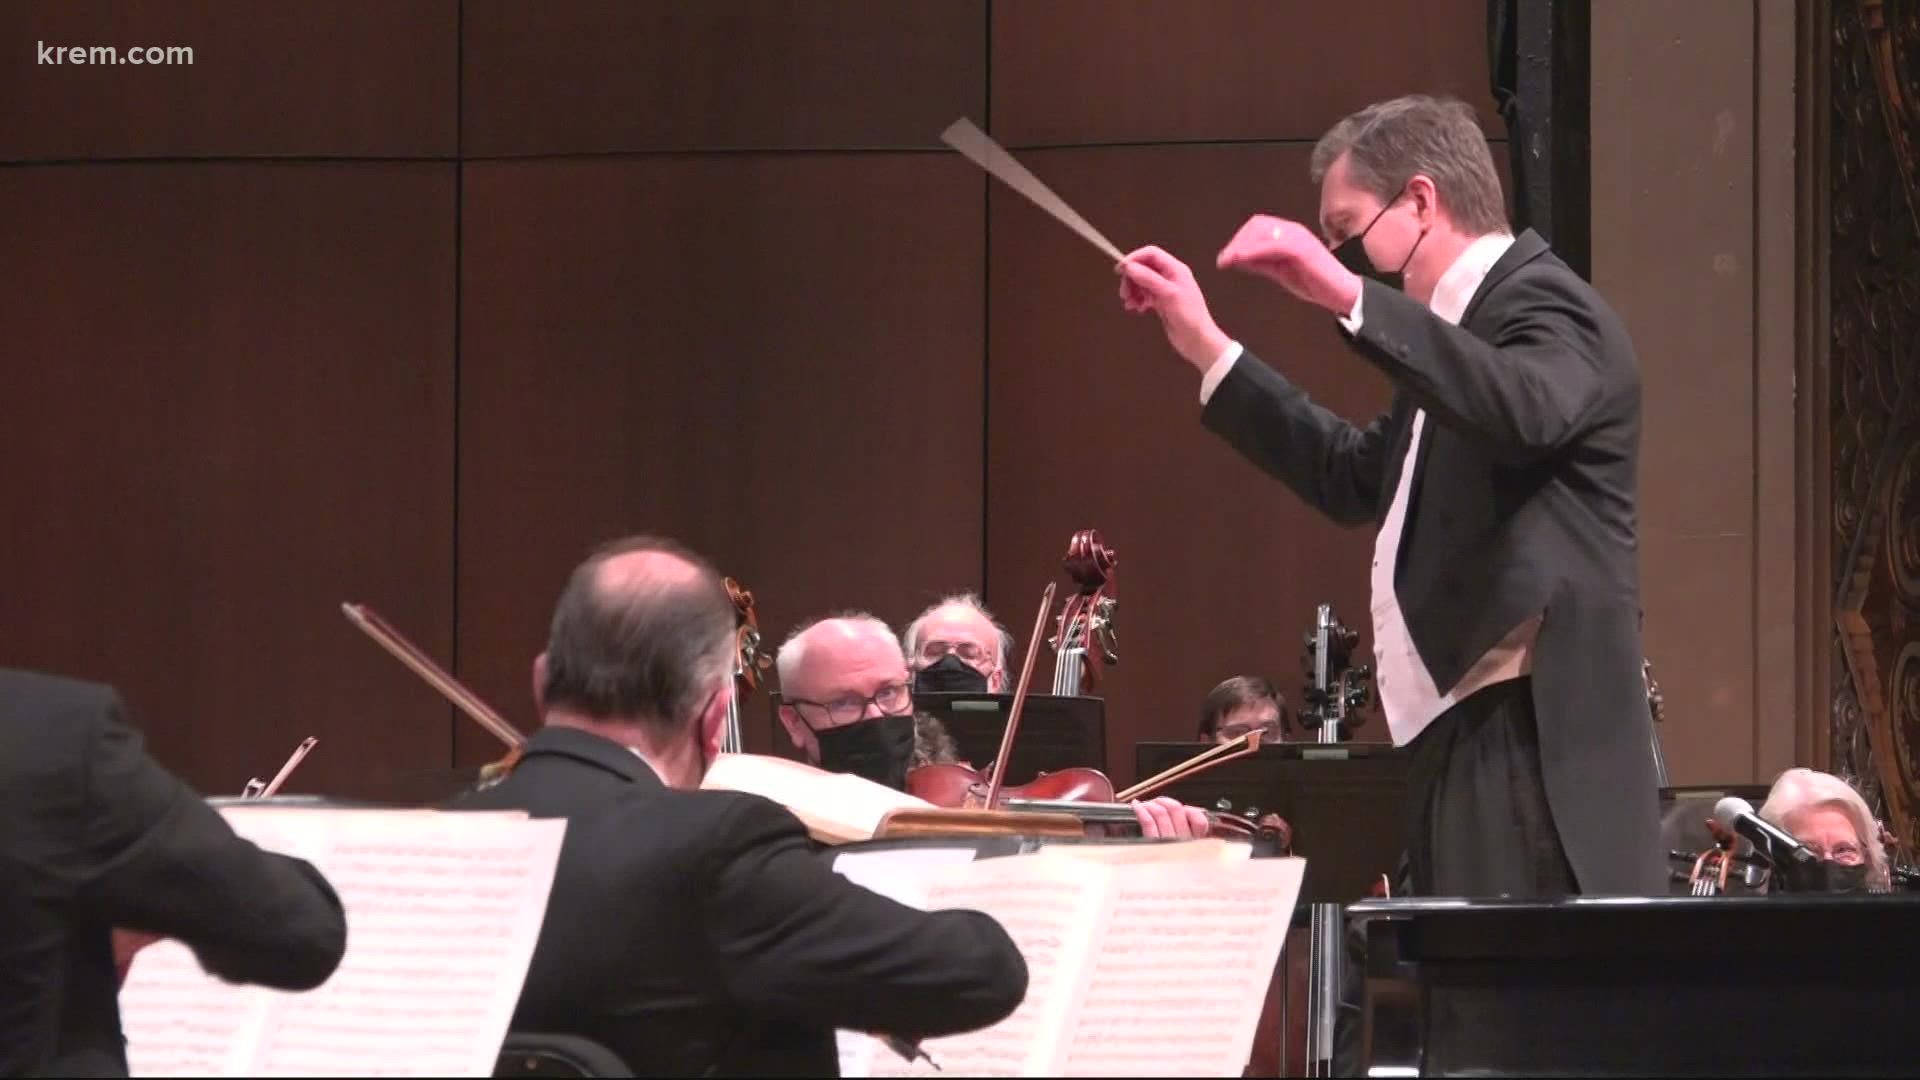 Spokane Symphony conductor James Lowe surprised concert attendees when he announced the orchestra would be playing the Ukrainian National Anthem.